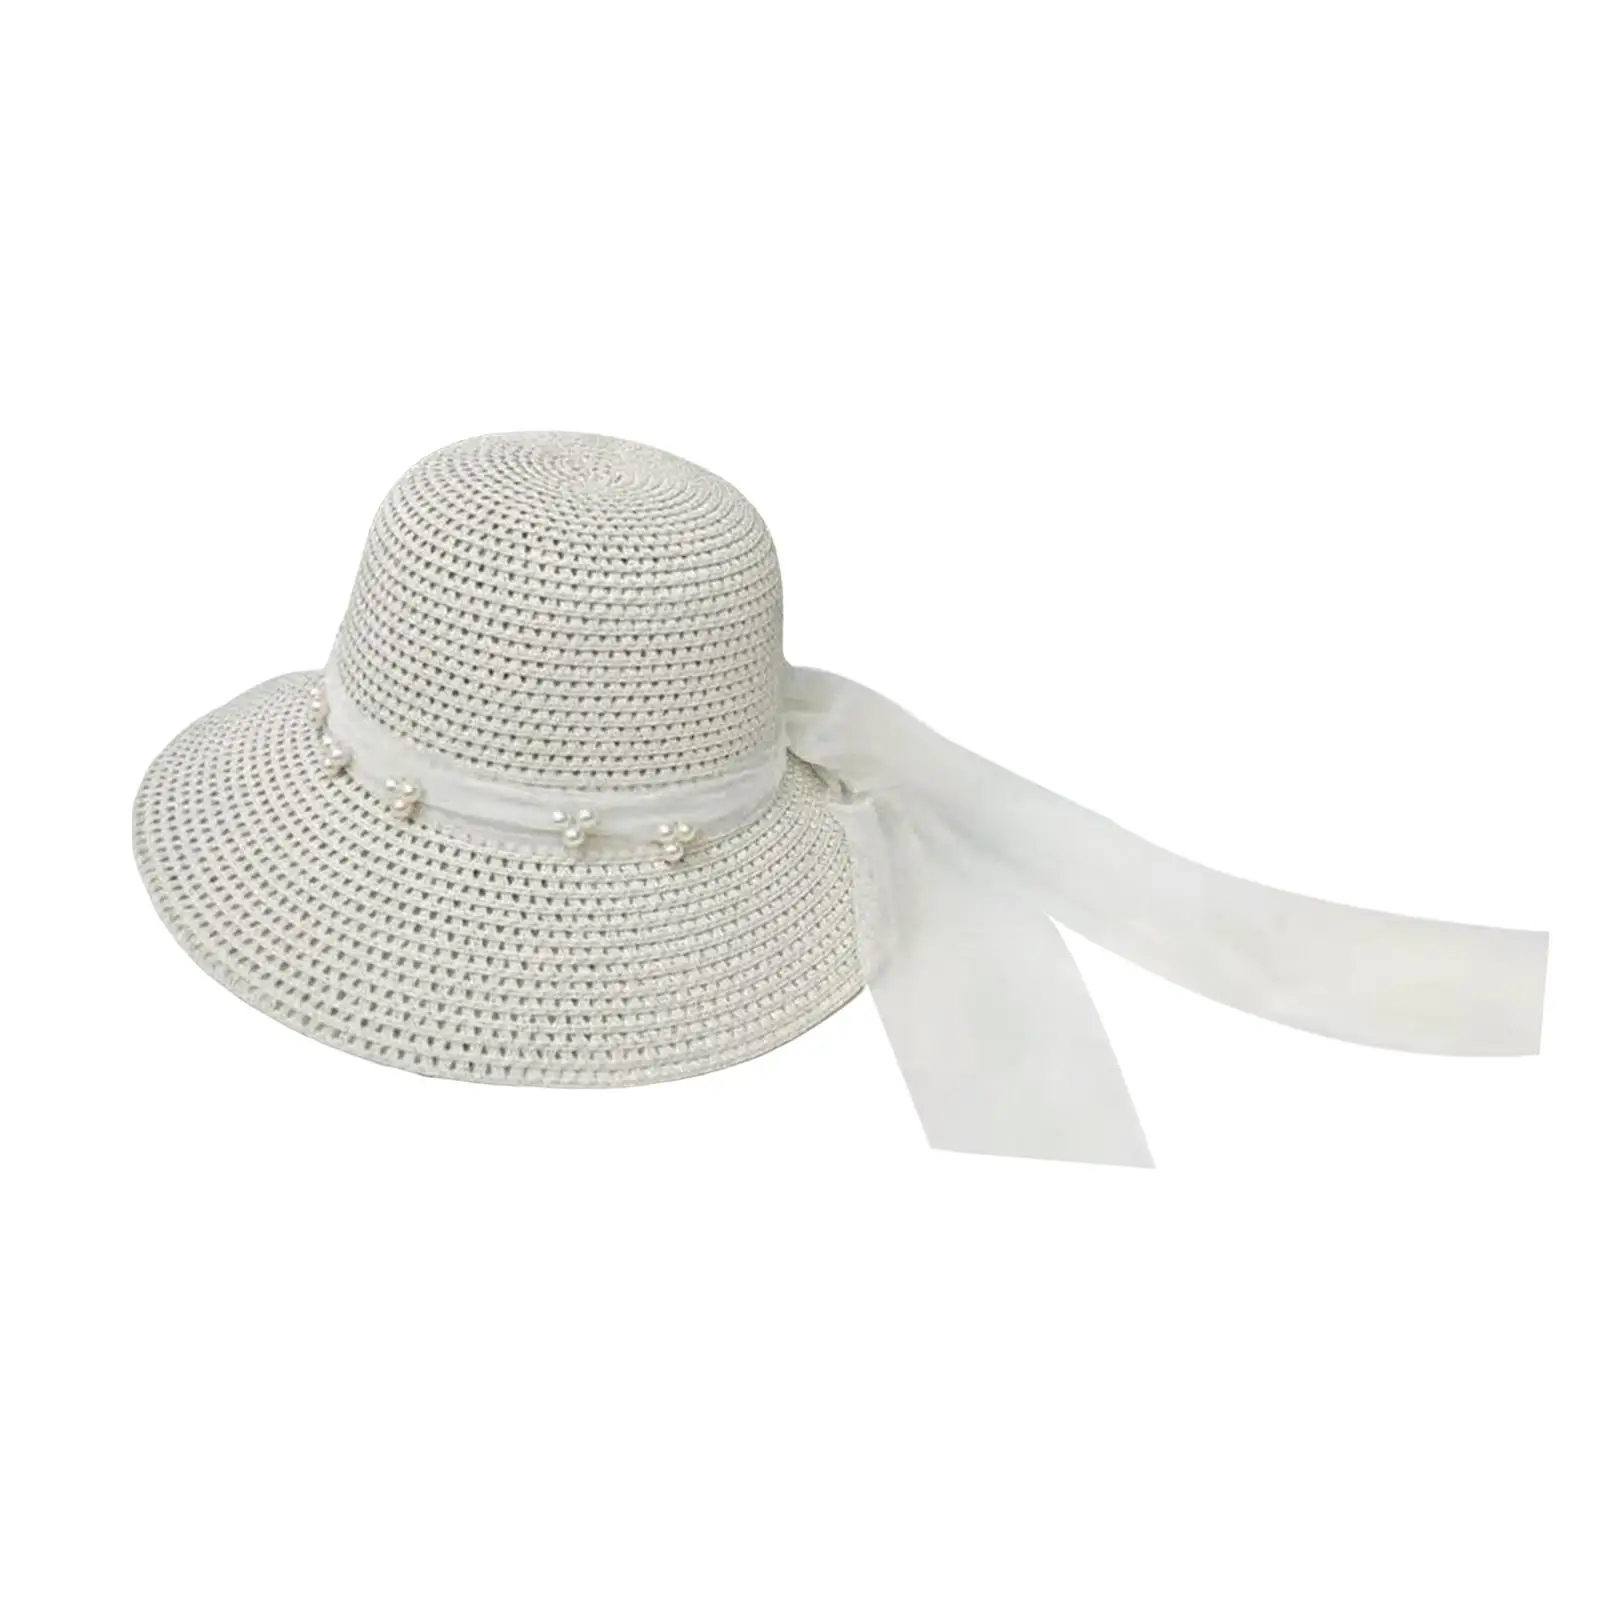 Womens Straw Hats Summer Beach Hat Sun Hat Fashion Packable Breathable Ladies Wide Brim Visor Hats for Holiday Vacation Travel